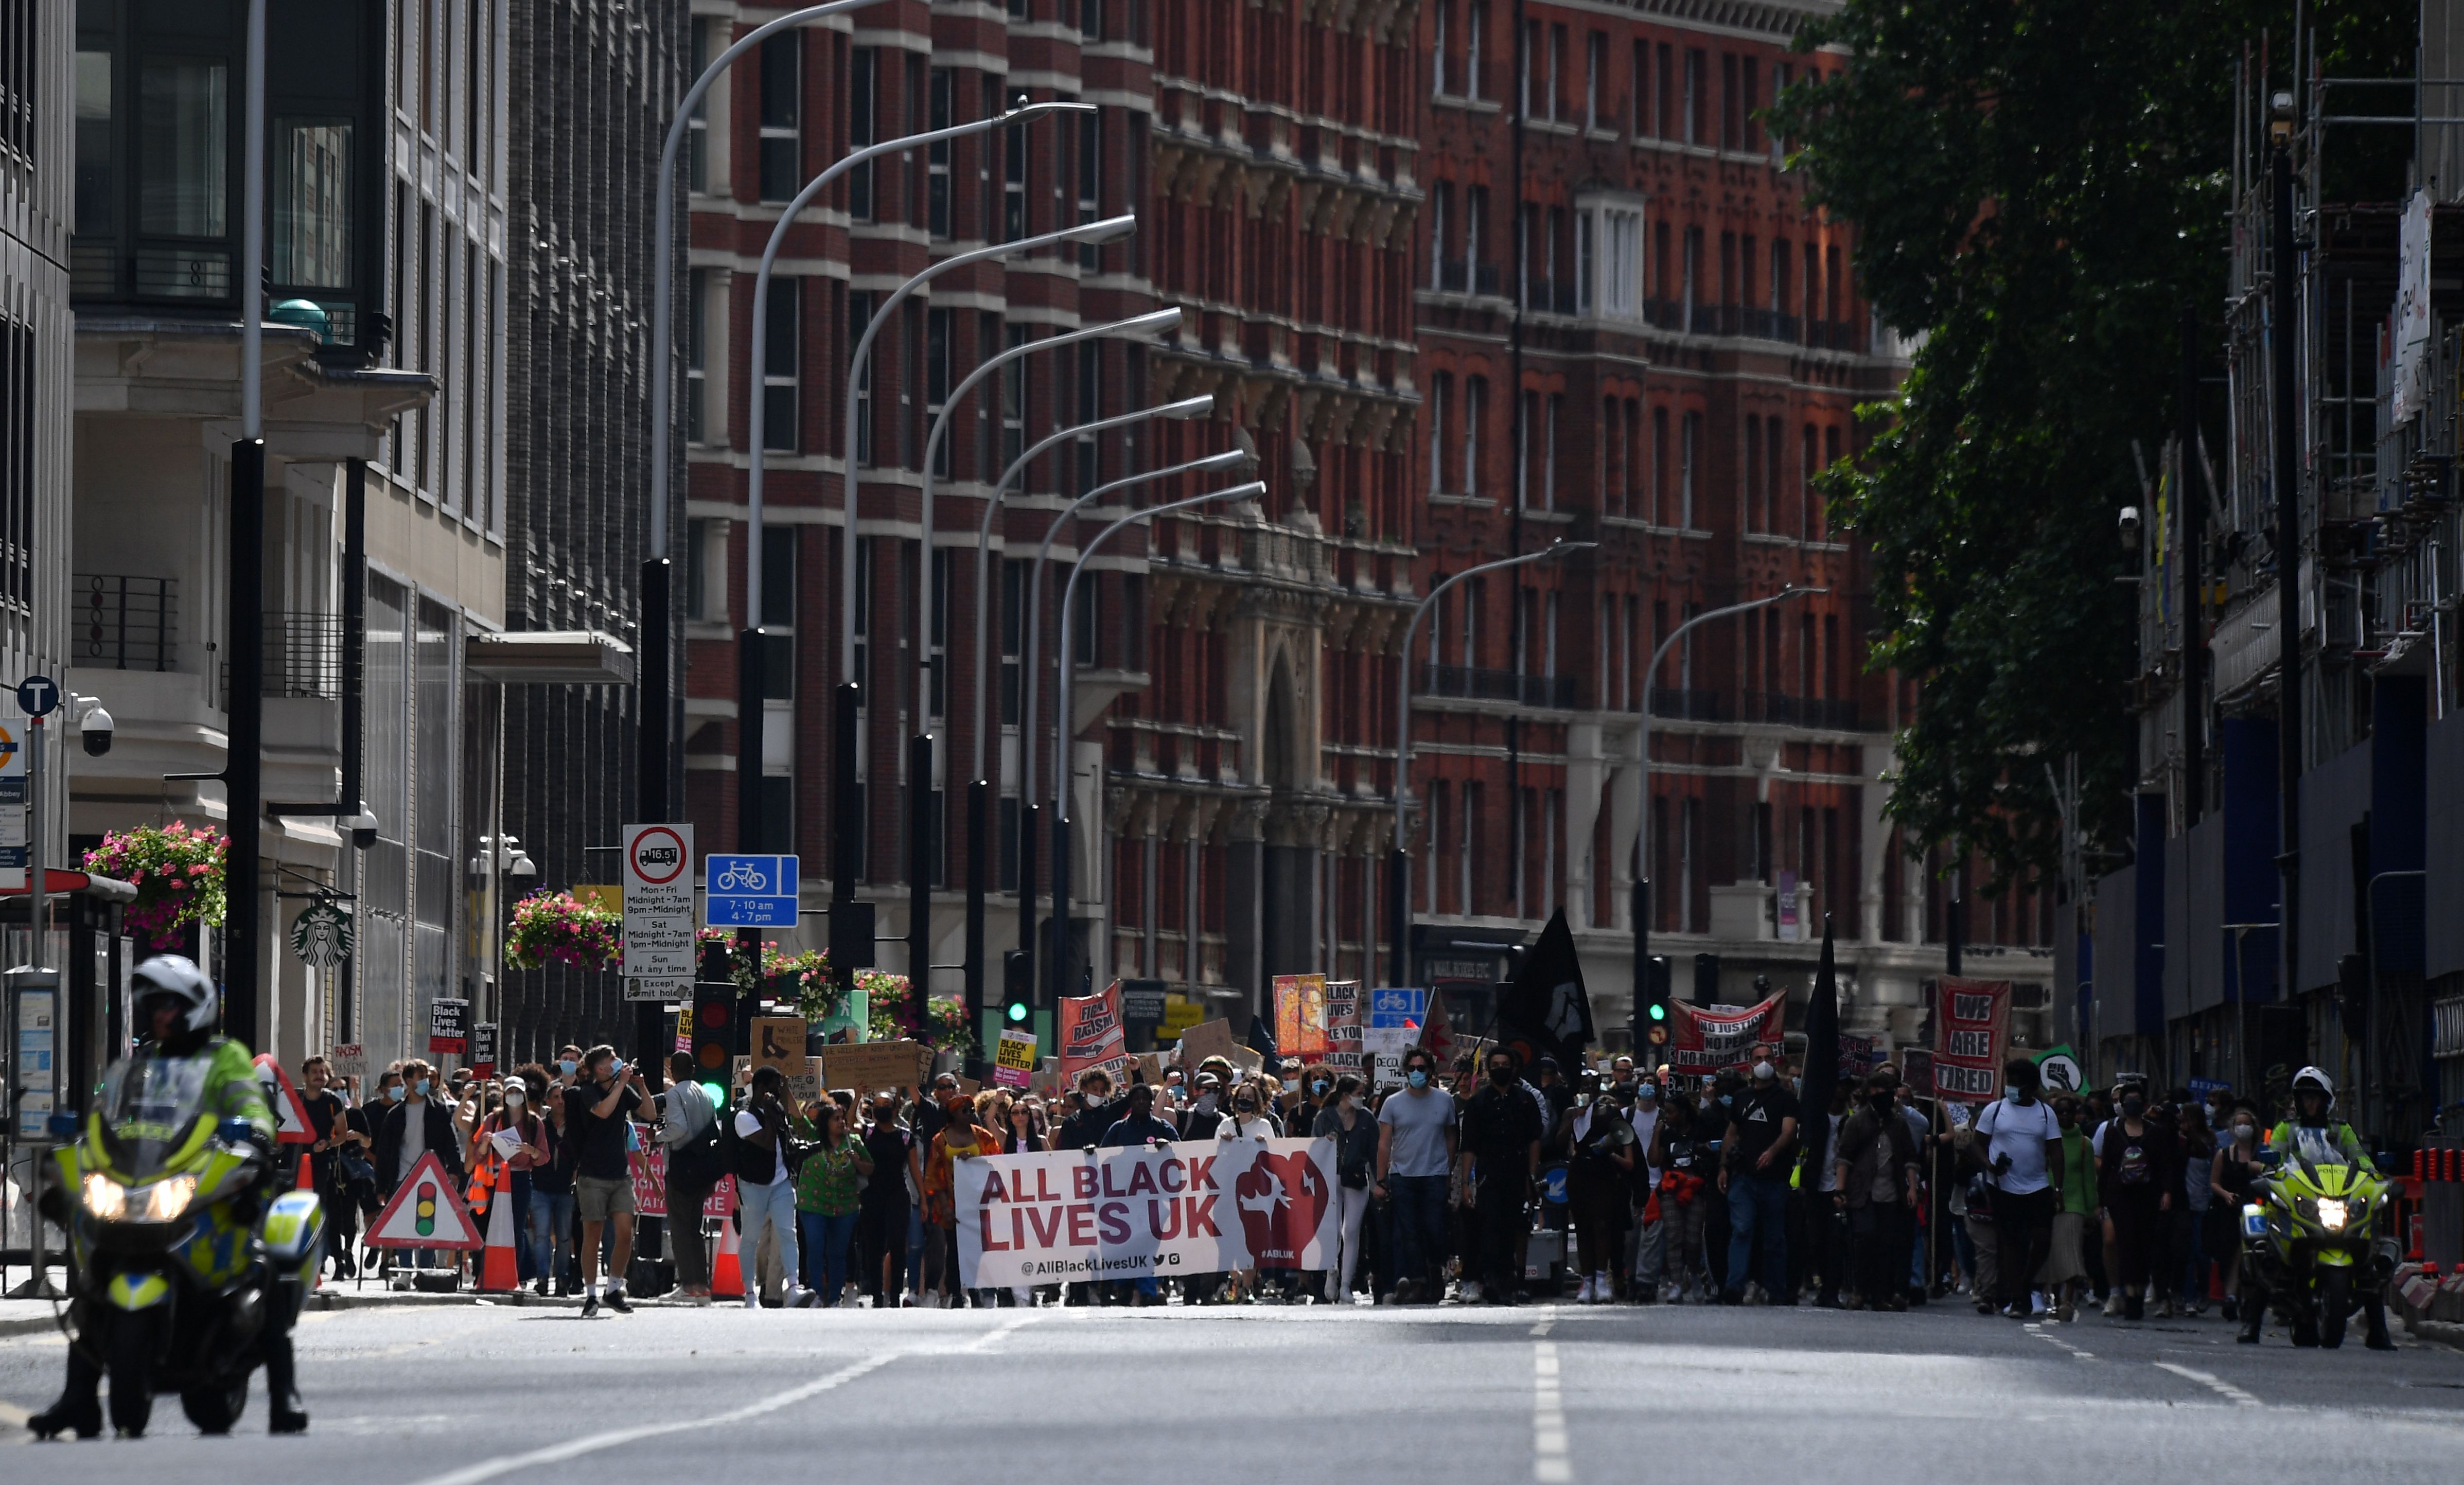 Protesters hold placards as they march through London towards Parliament Square in support of the Black Lives Matter movement in London on July 5, 2020